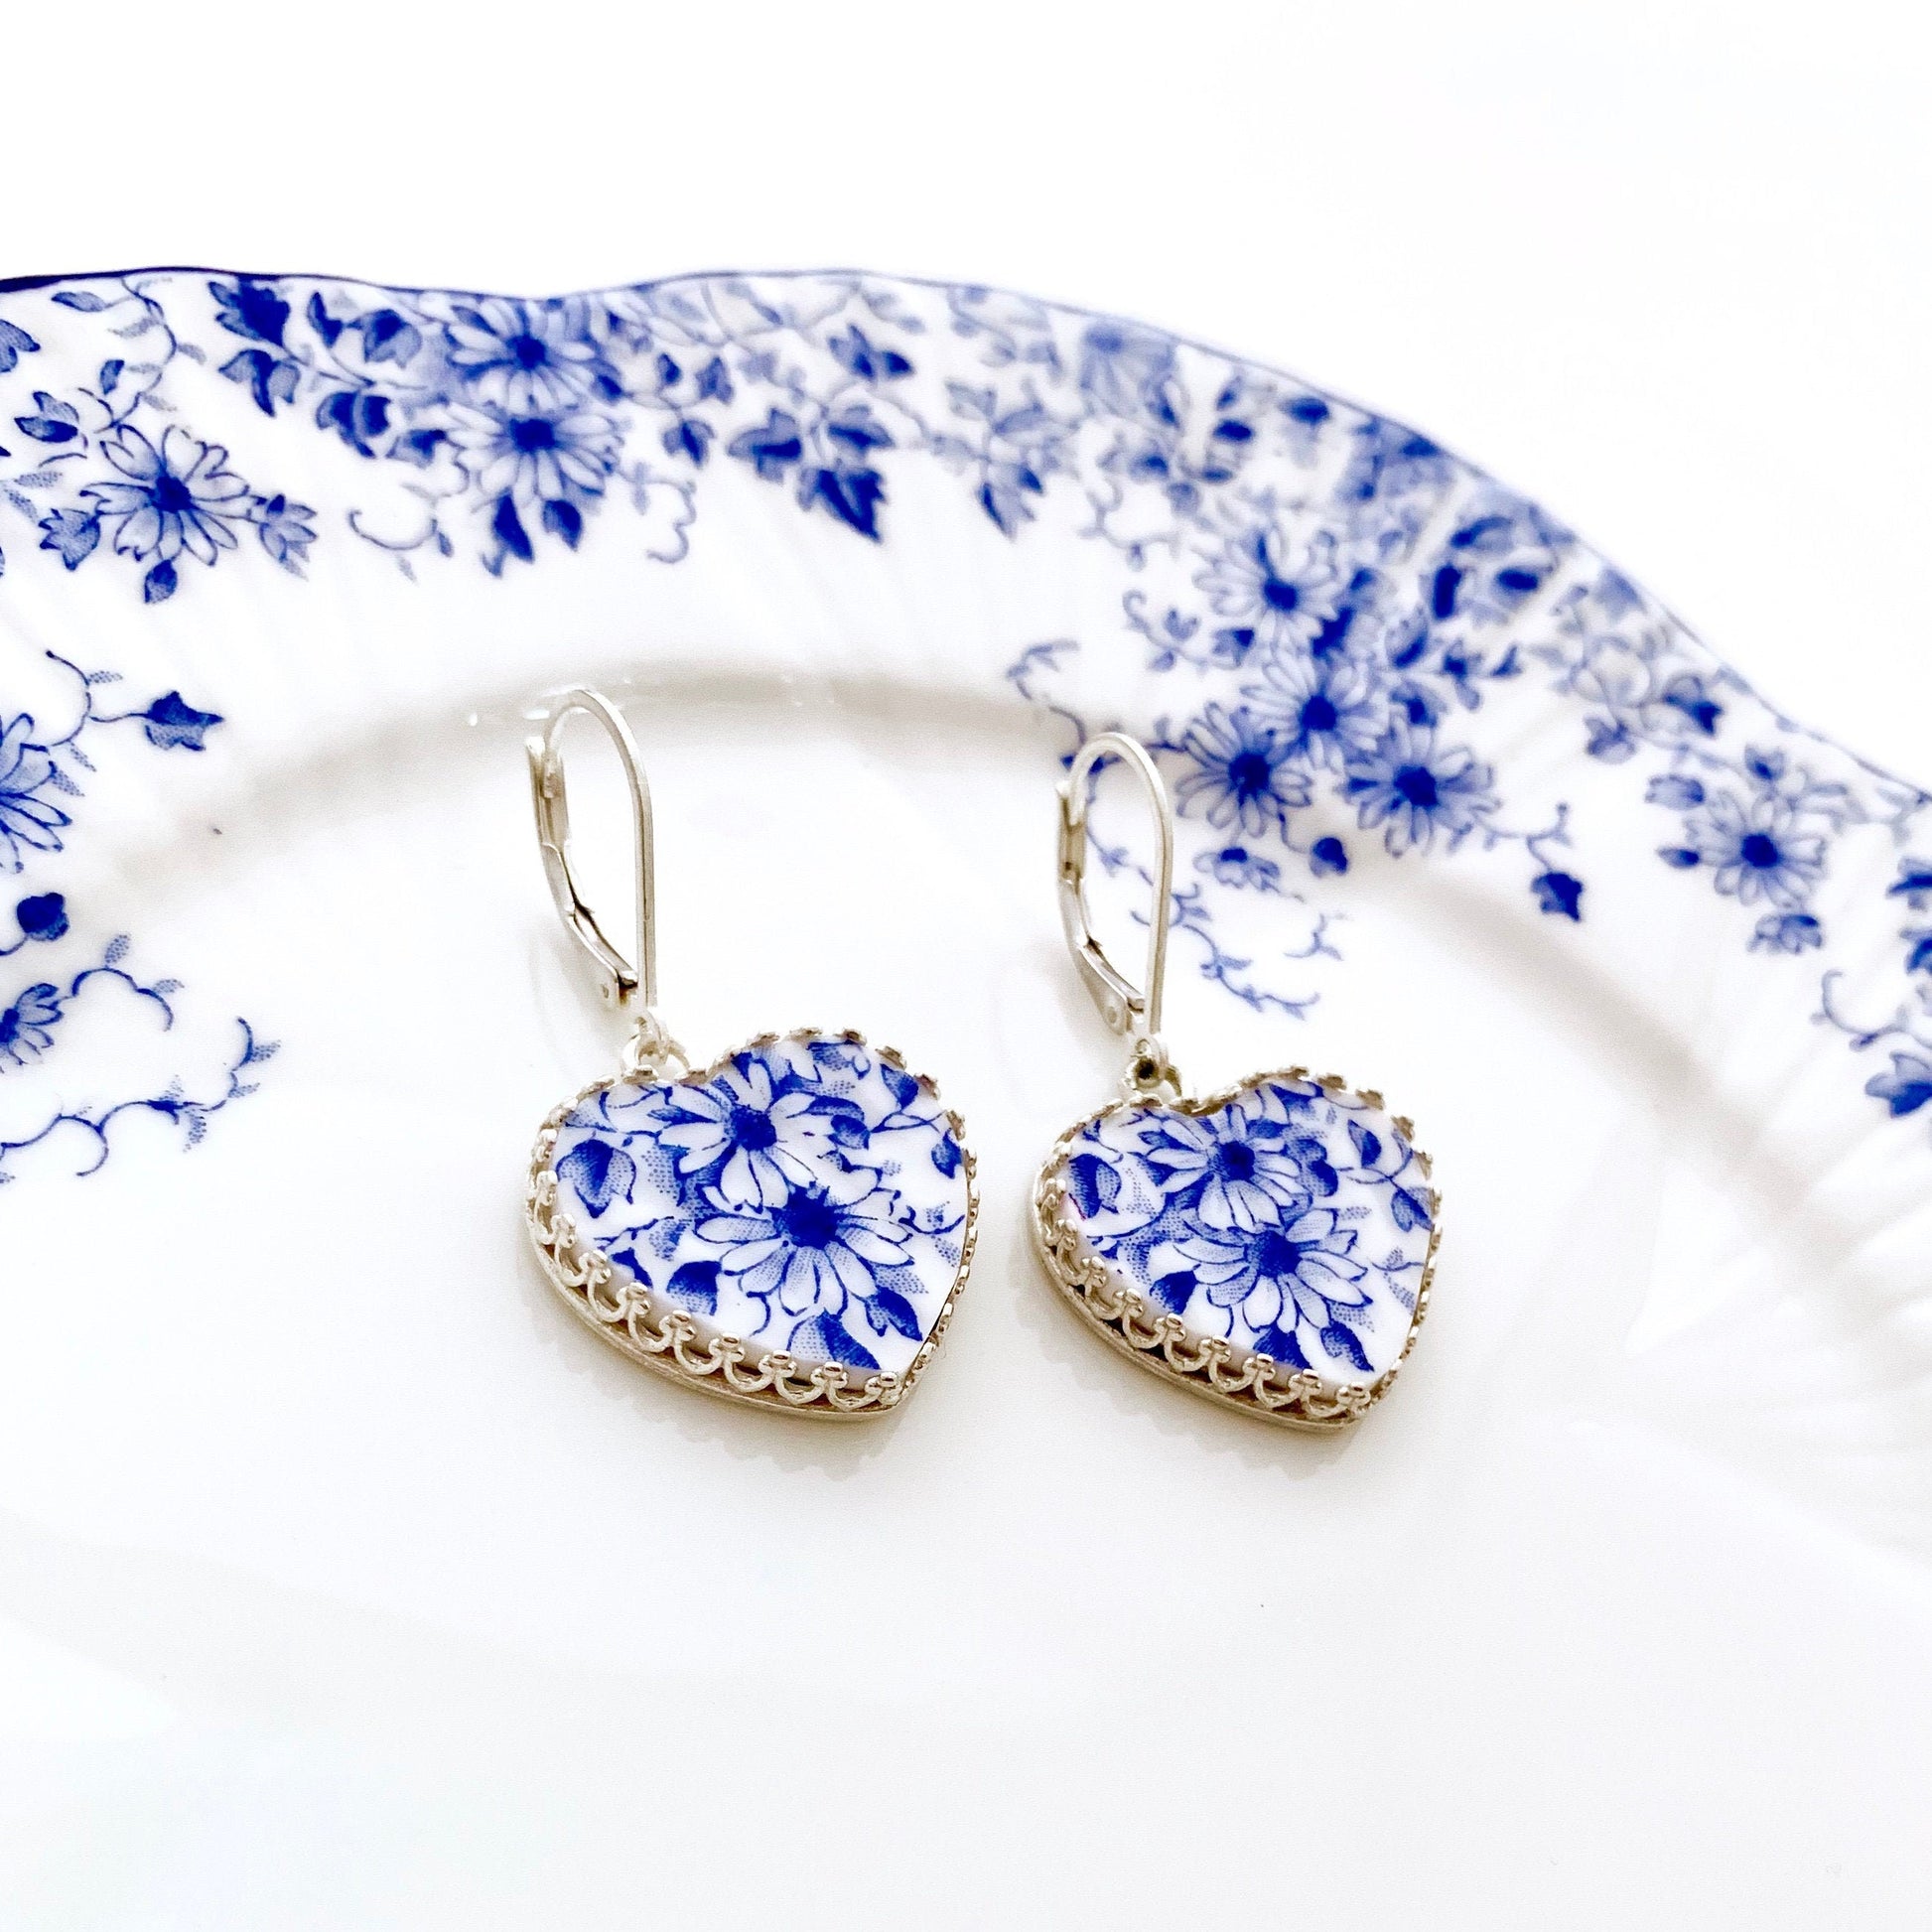 20th Anniversary Gift for Wife Blue and White Broken China Jewelry Heart Earrings Gift